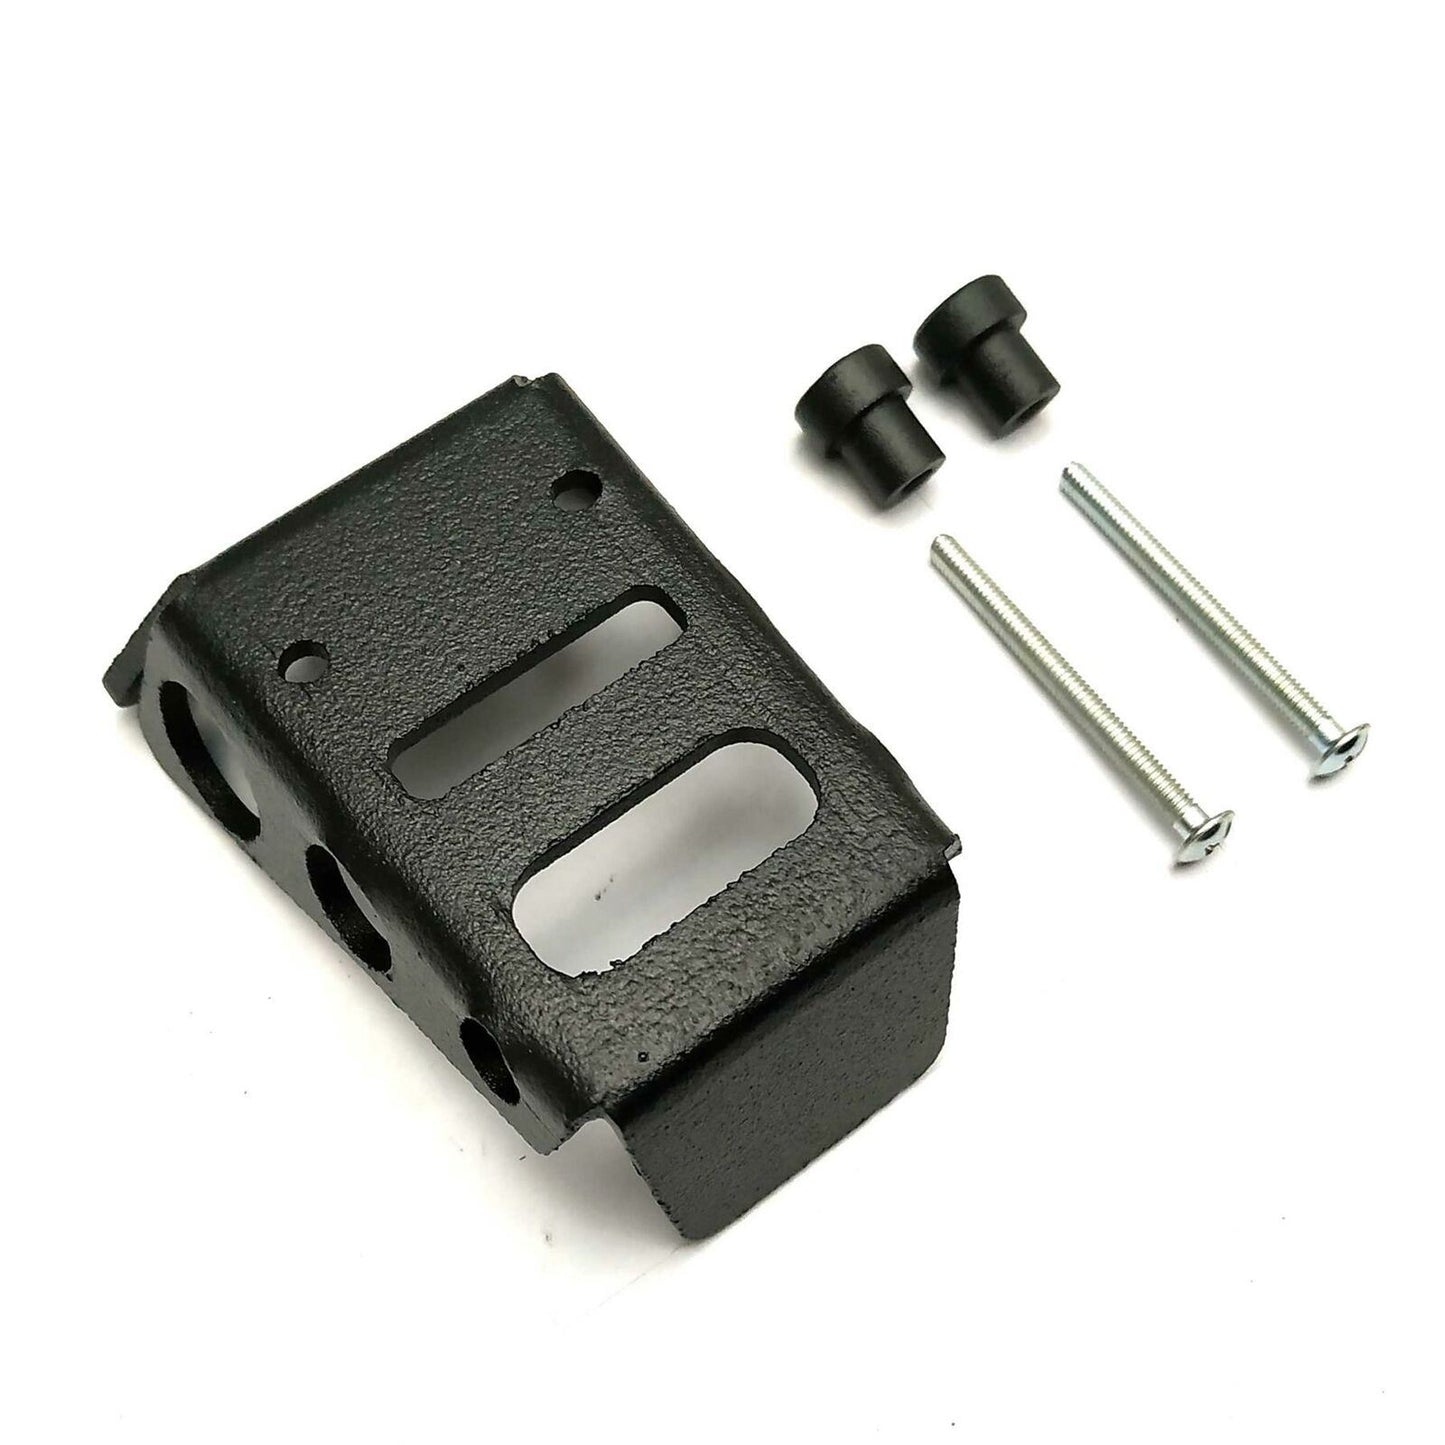 BMW R1200GS & ADV TPS throttle sensor switch guard protector cover 2004-12